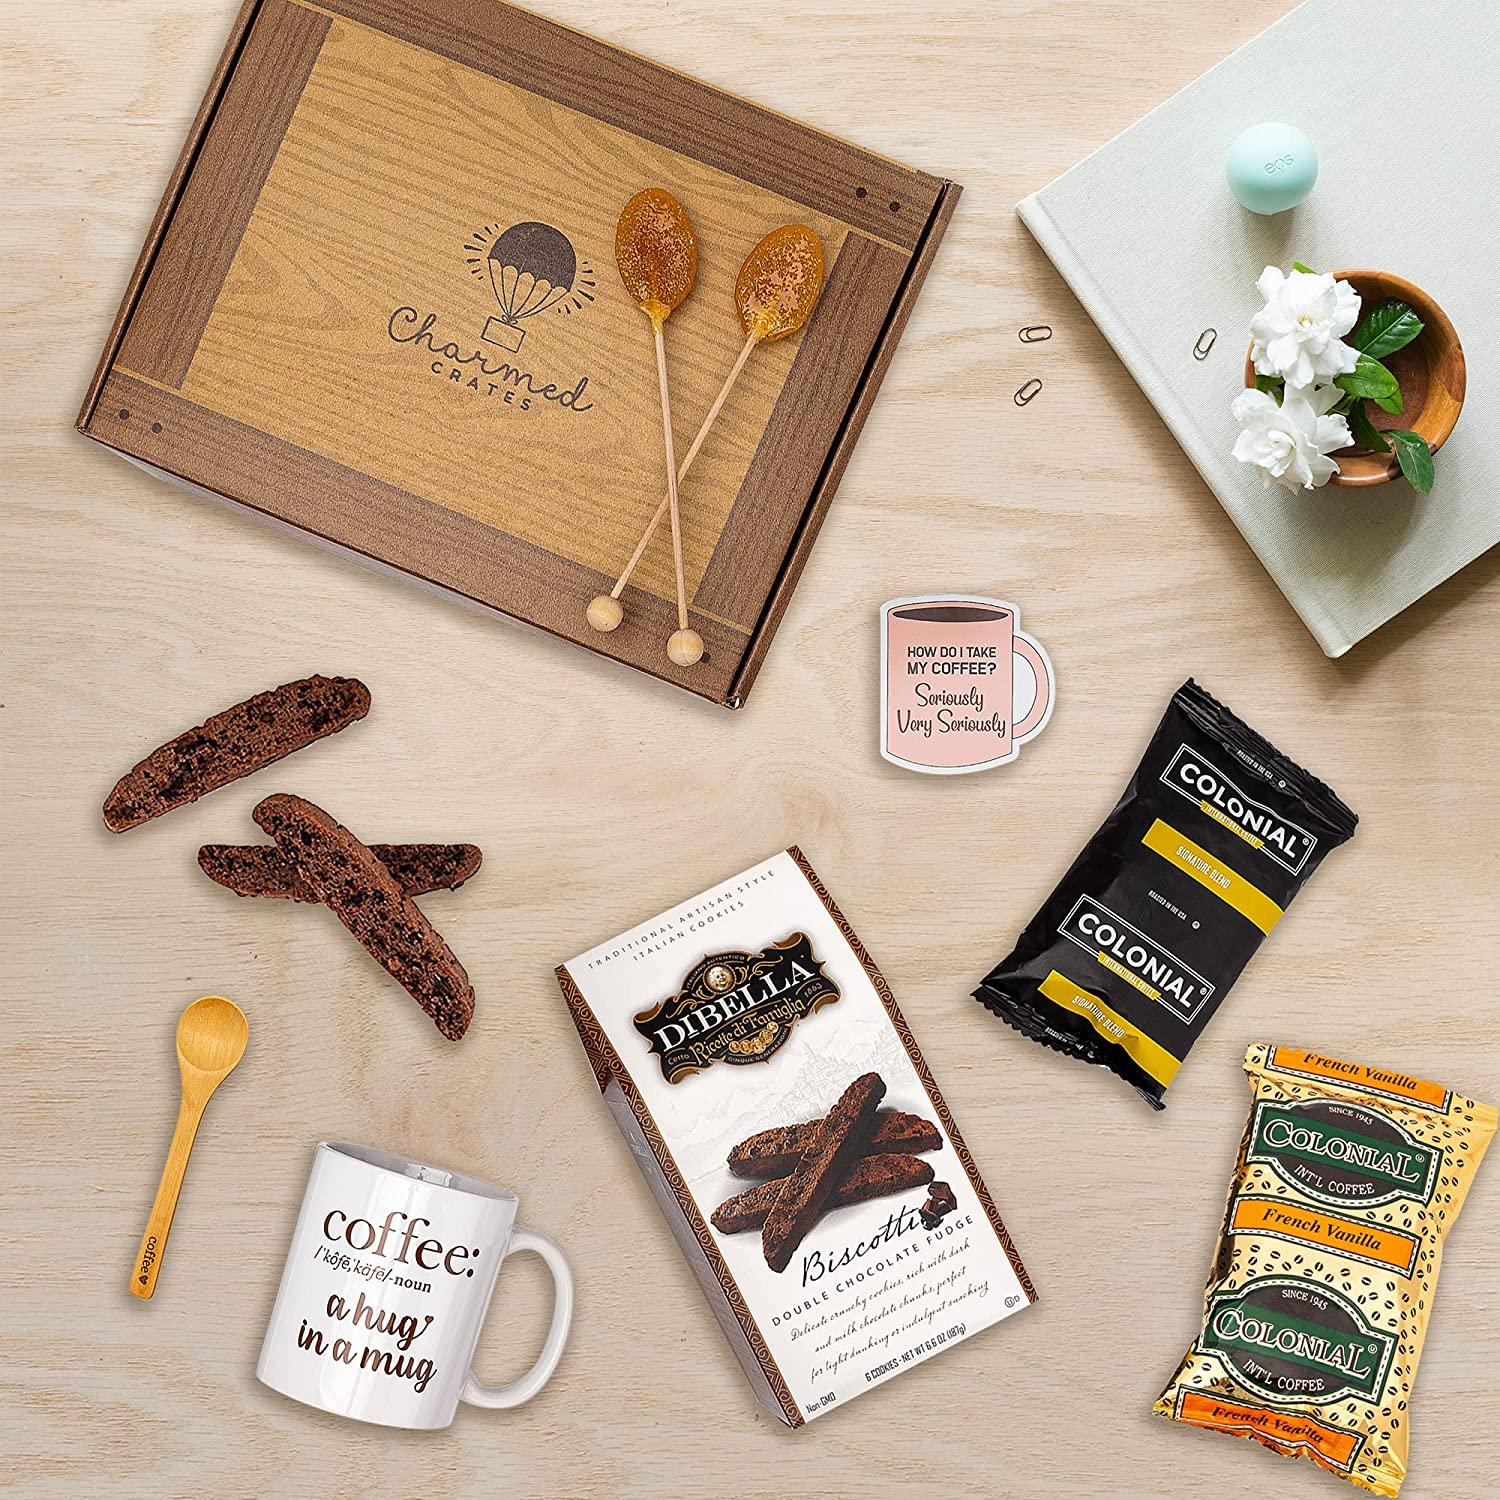 20 Gifts for Coffee Lovers ⋆ Sugar, Spice and Glitter